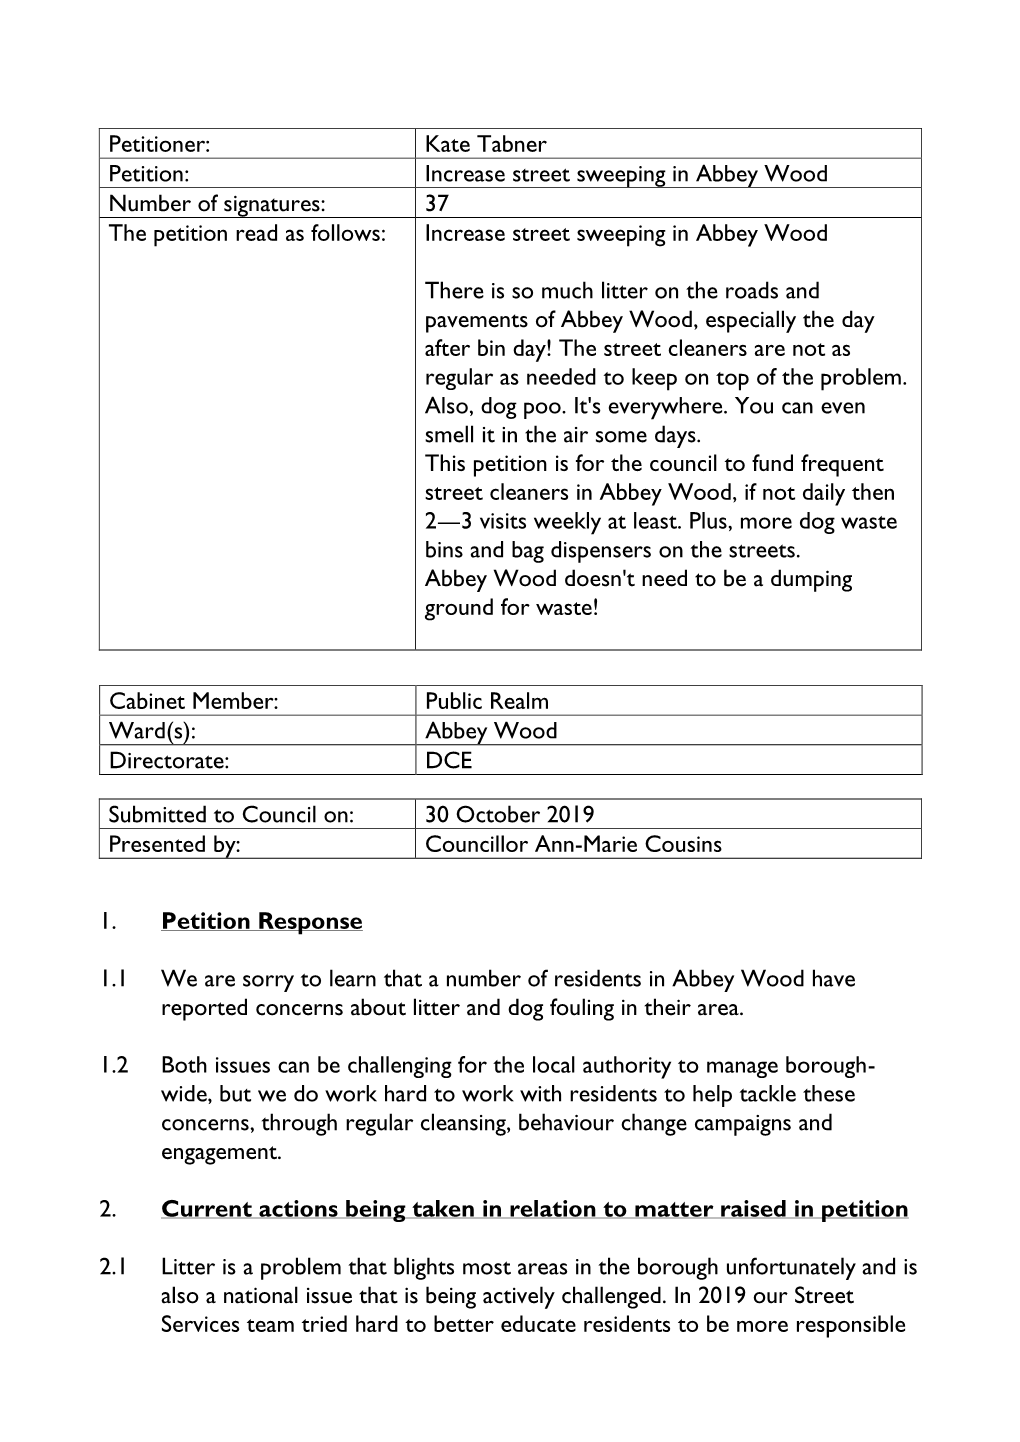 Kate Tabner Petition: Increase Street Sweeping in Abbey Wood Number of Signatures: 37 the Petition Read As Follows: Increase Street Sweeping in Abbey Wood